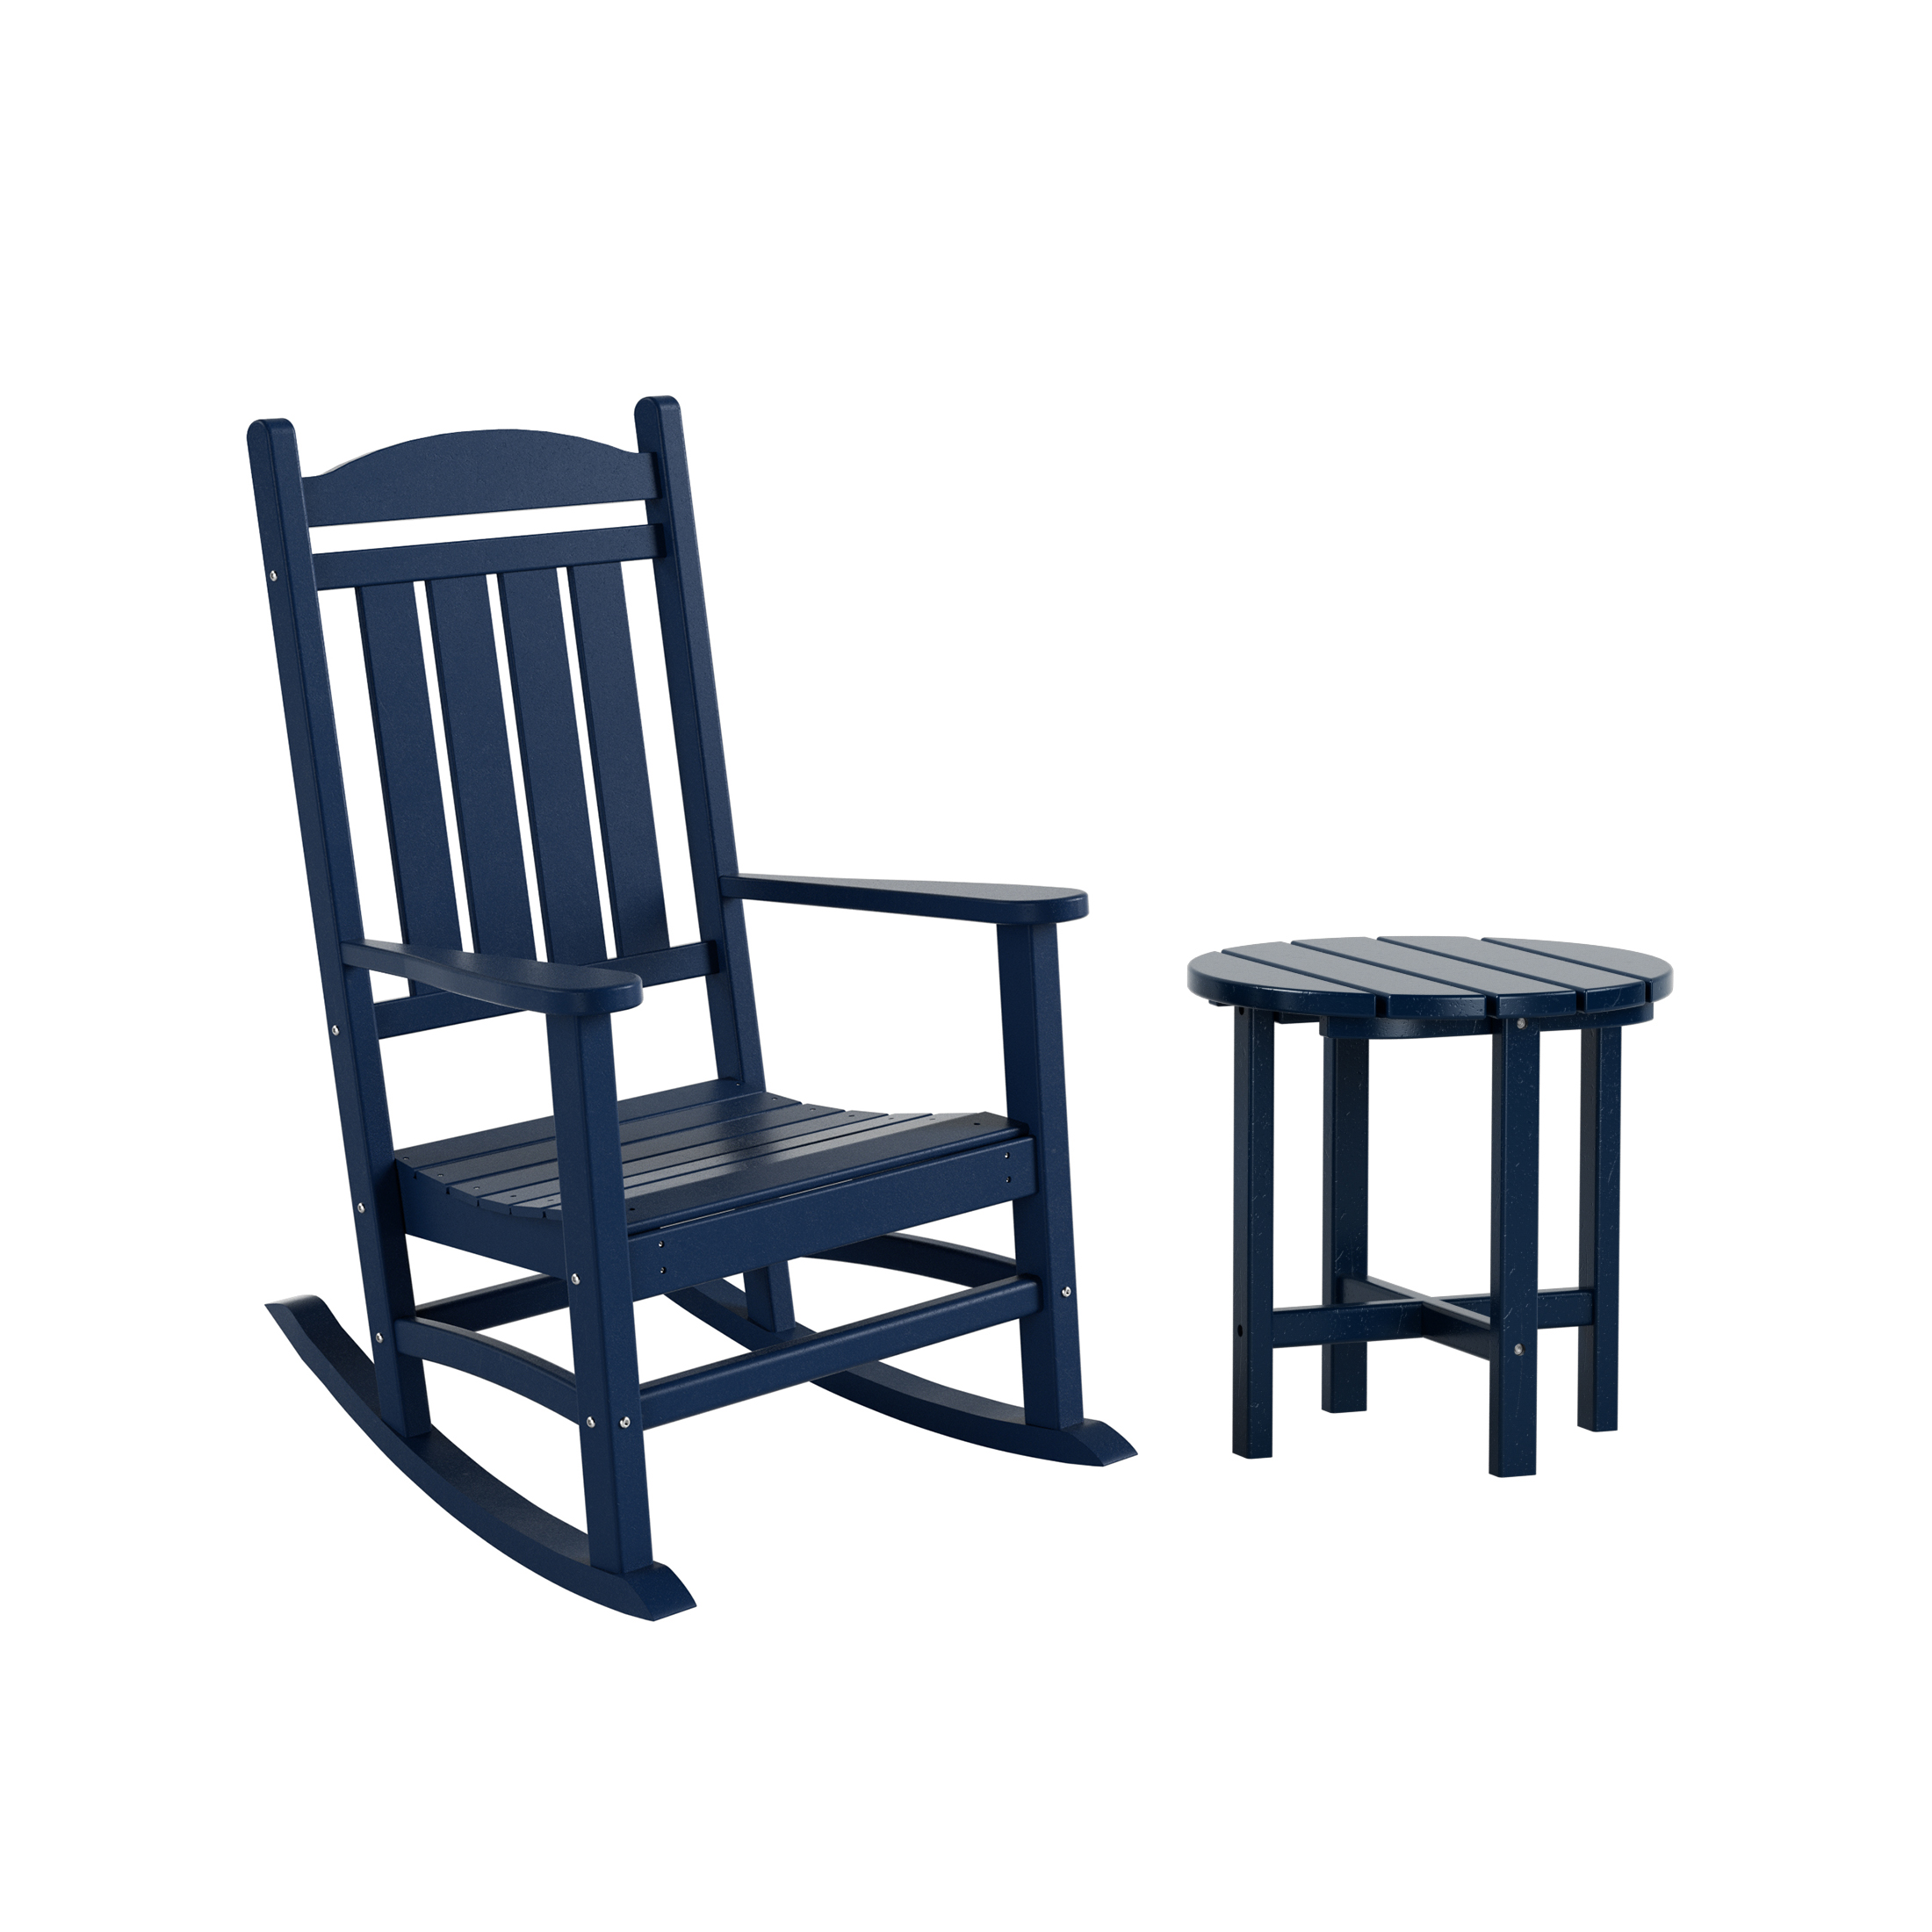 GARDEN 2-Piece Set Classic Plastic Porch Rocking Chair with Round Side Table Included, Navy Blue - image 2 of 7